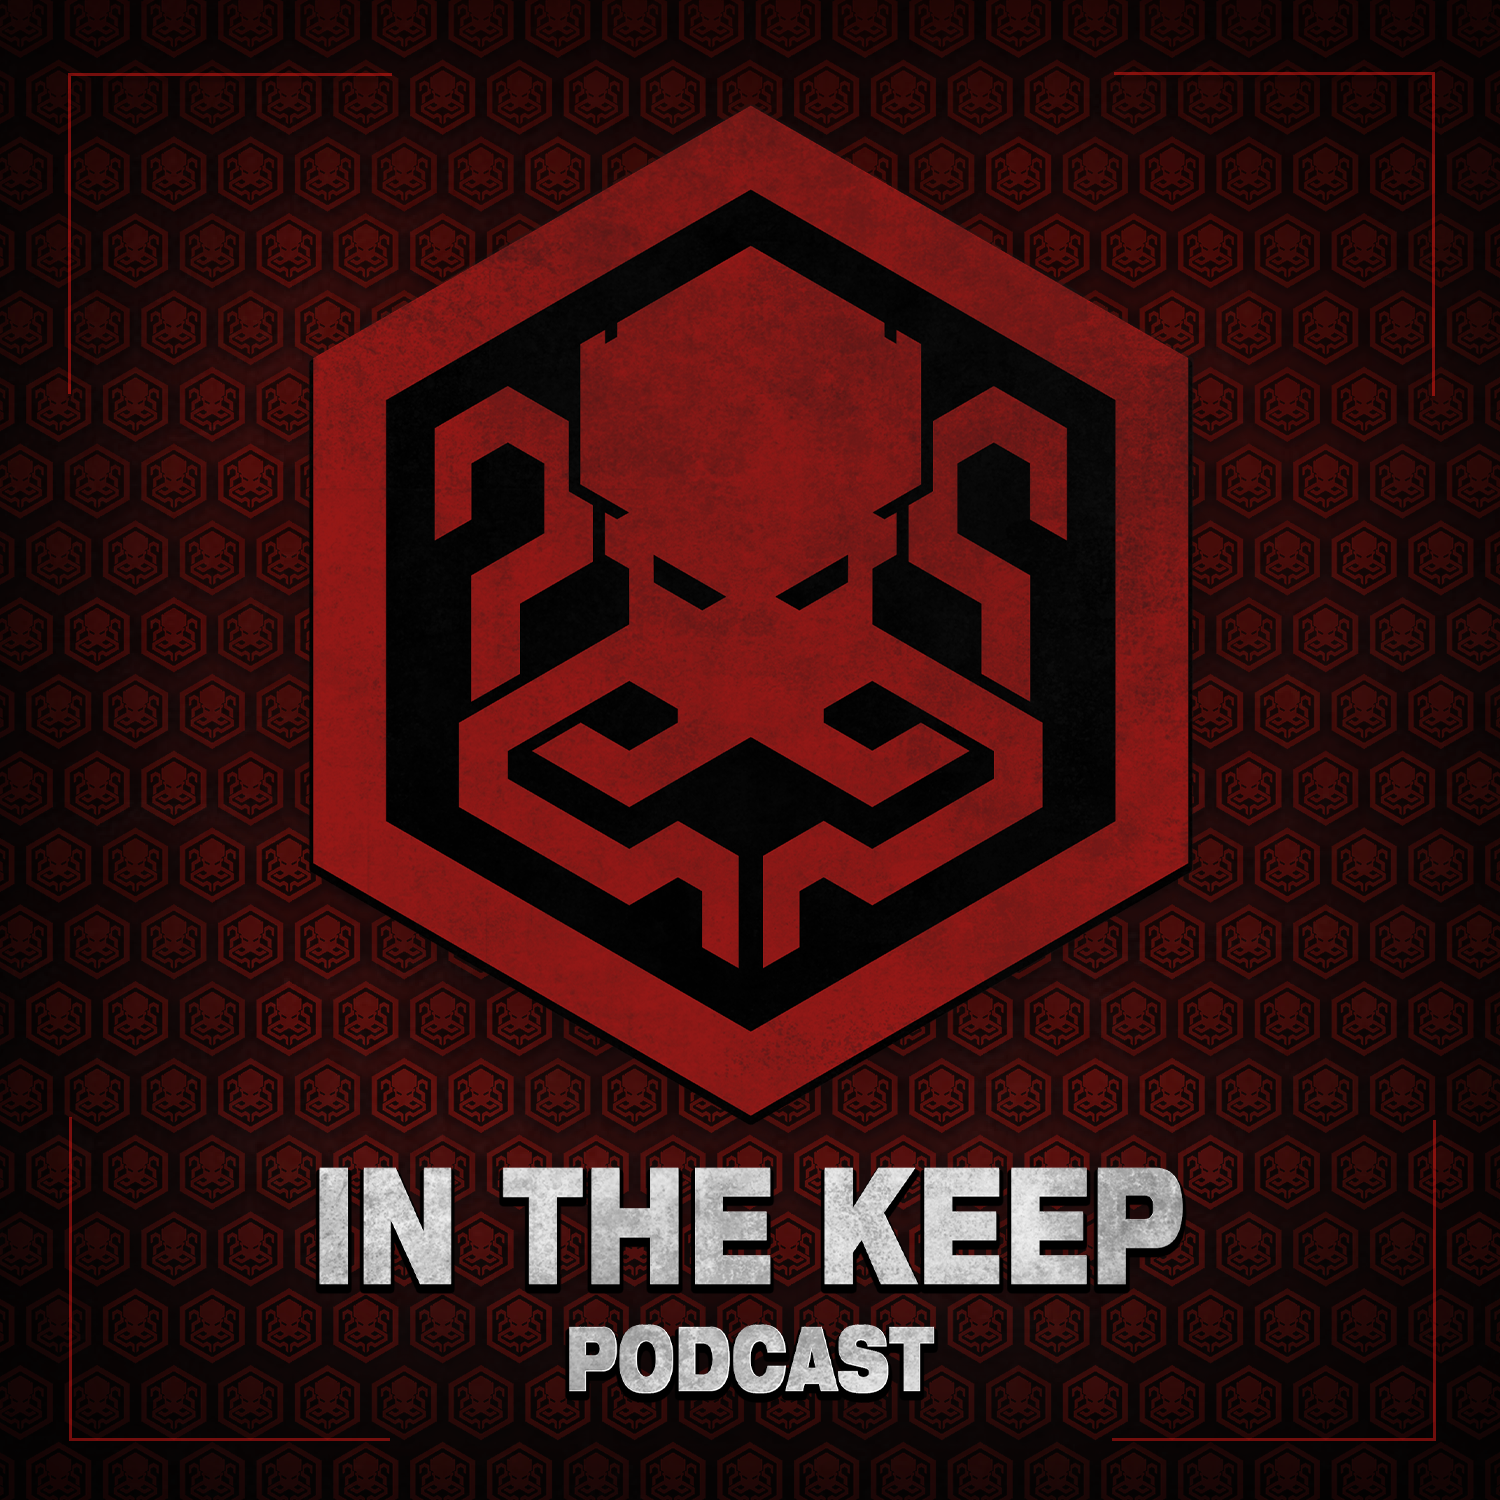 In The Keep Podcast – #68 Robert Raulus & Mikko Tamper (White Hell)